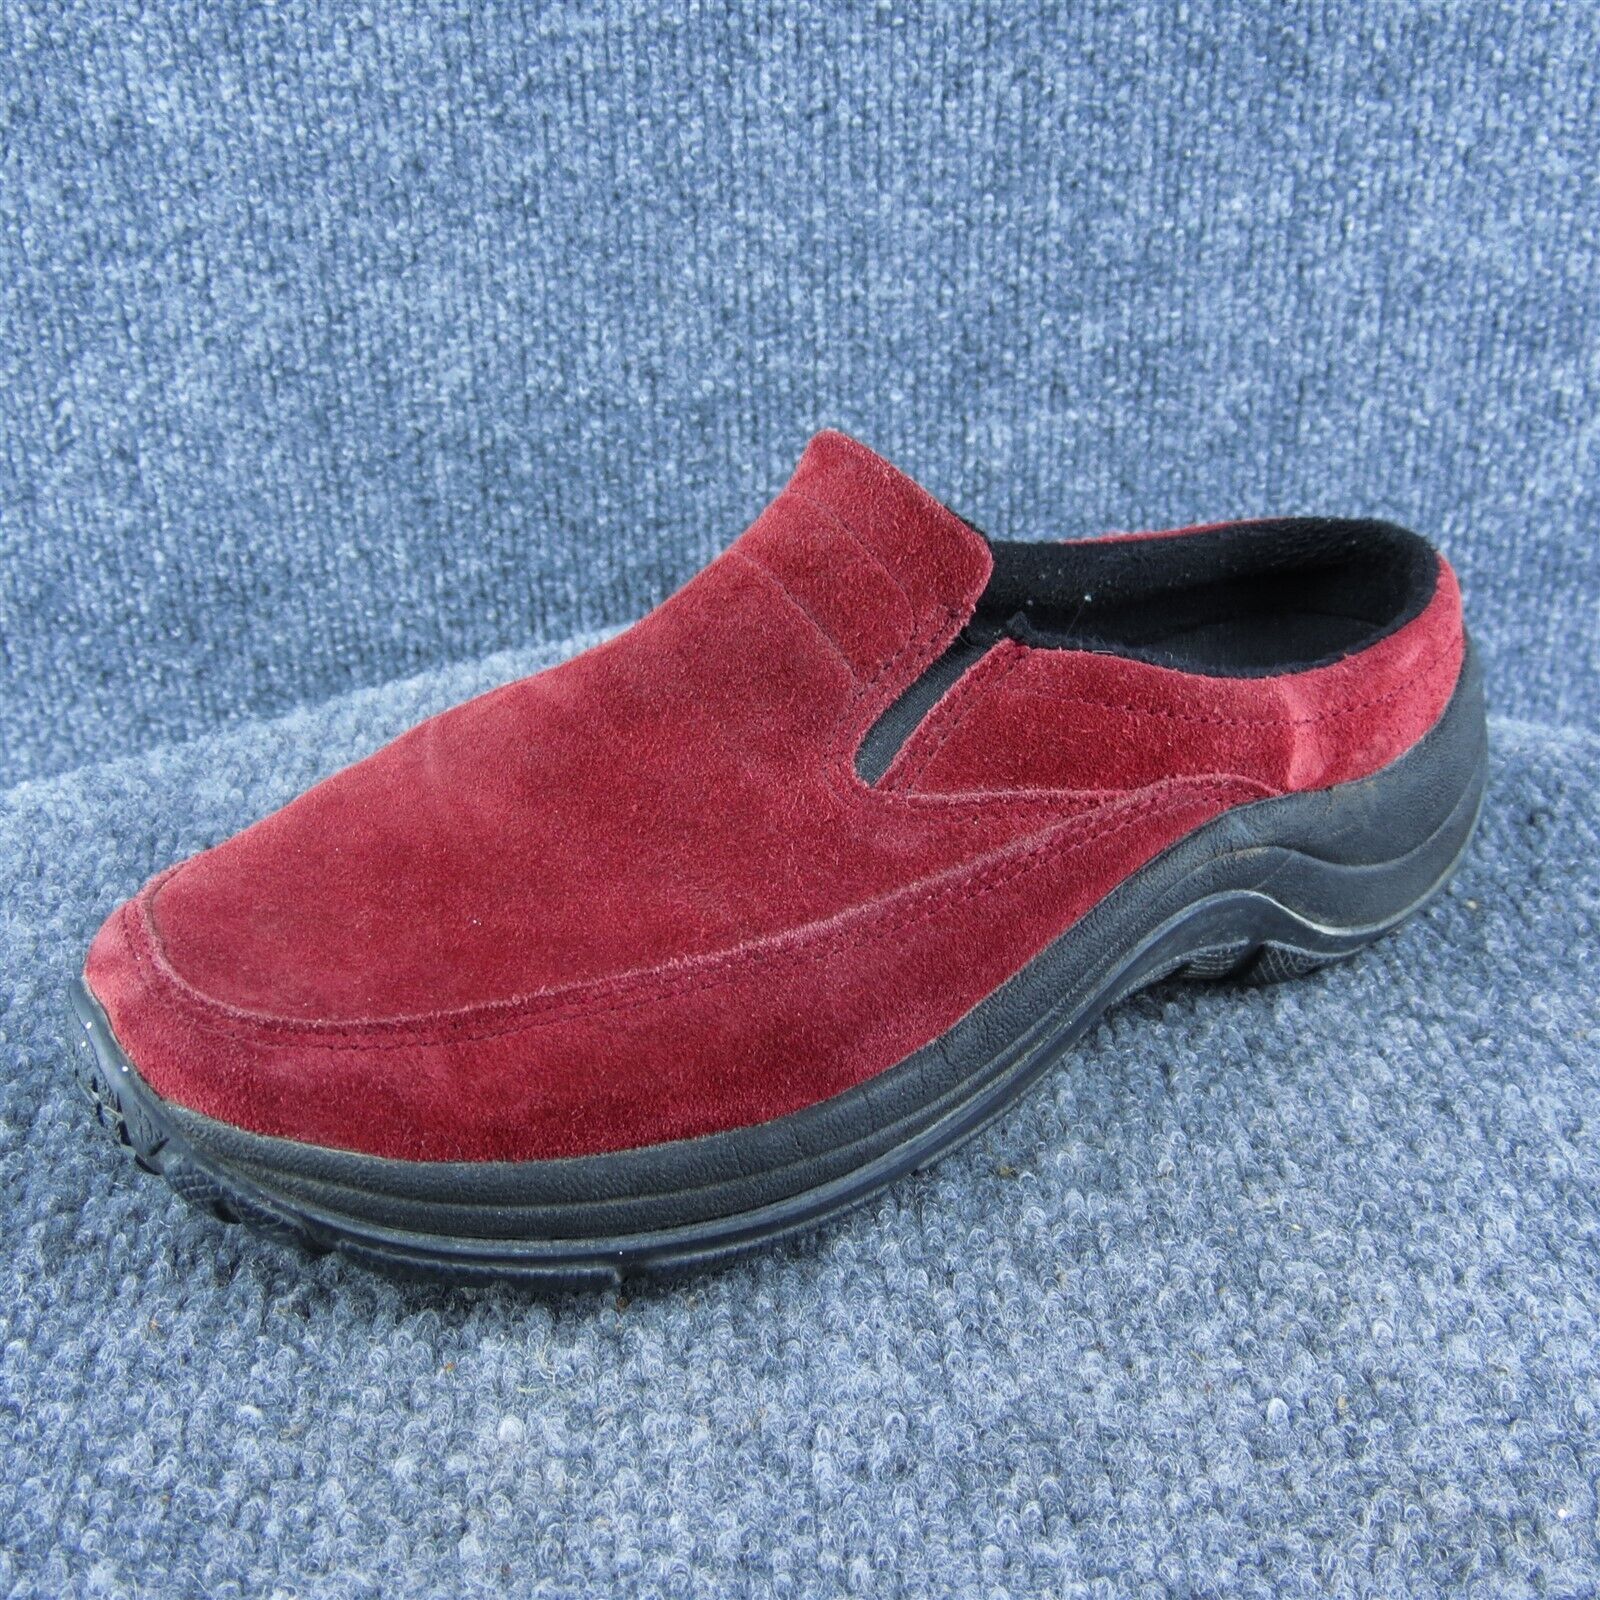 Primary image for L.L. Bean  Women Mule Shoes Red Suede Slip On Size 7.5 Medium